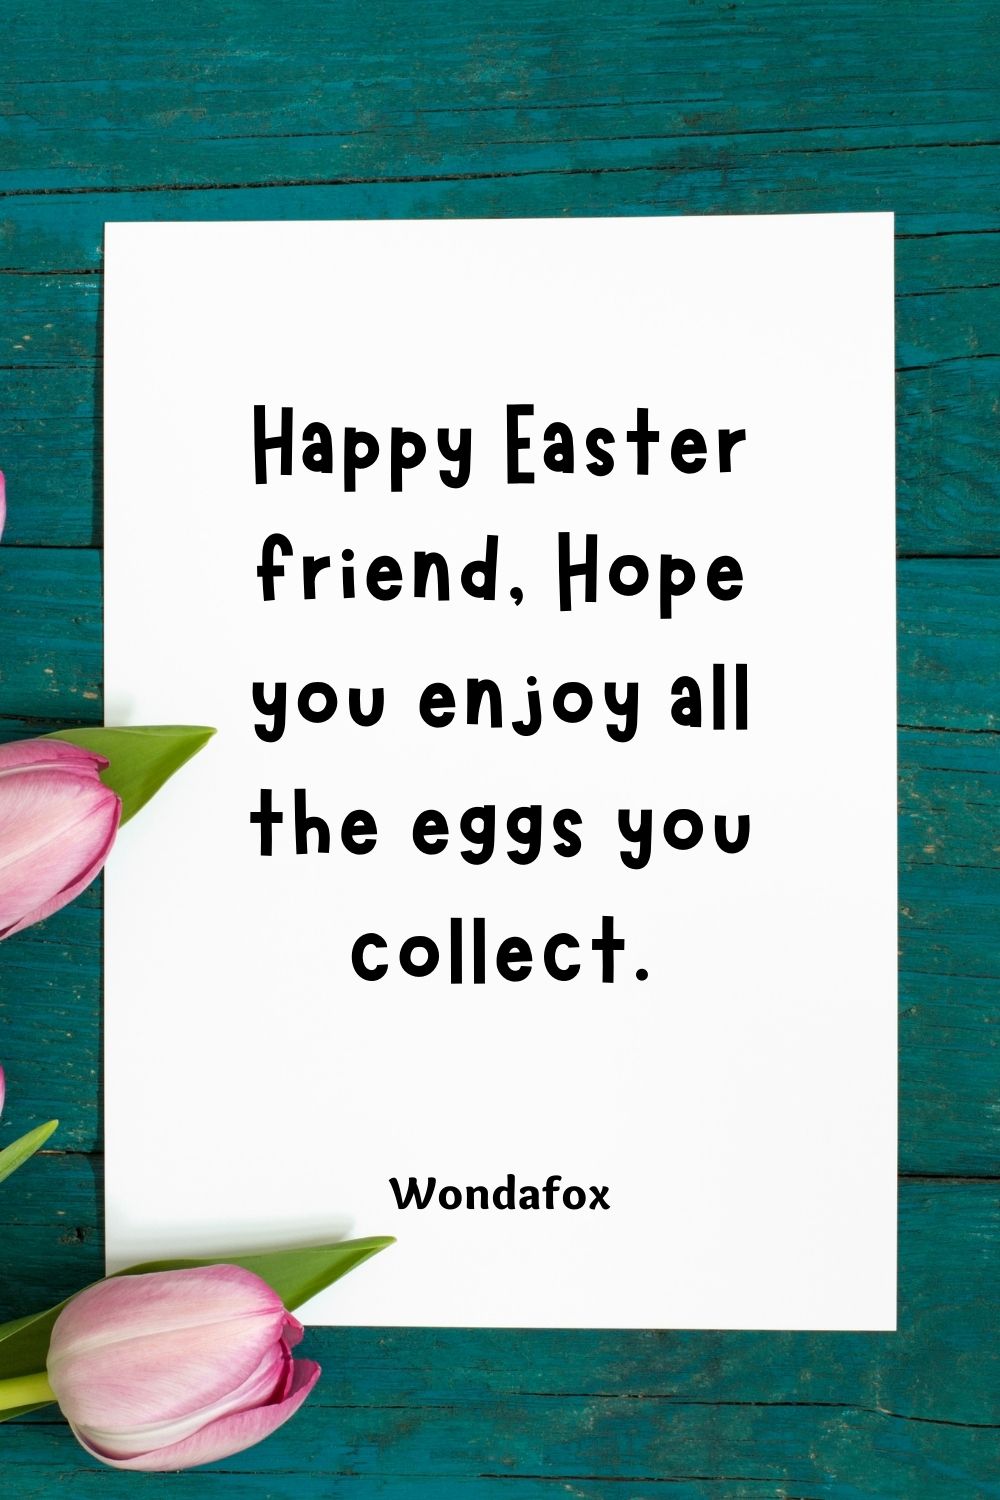 Happy Easter friend, Hope you enjoy all the eggs you collect.